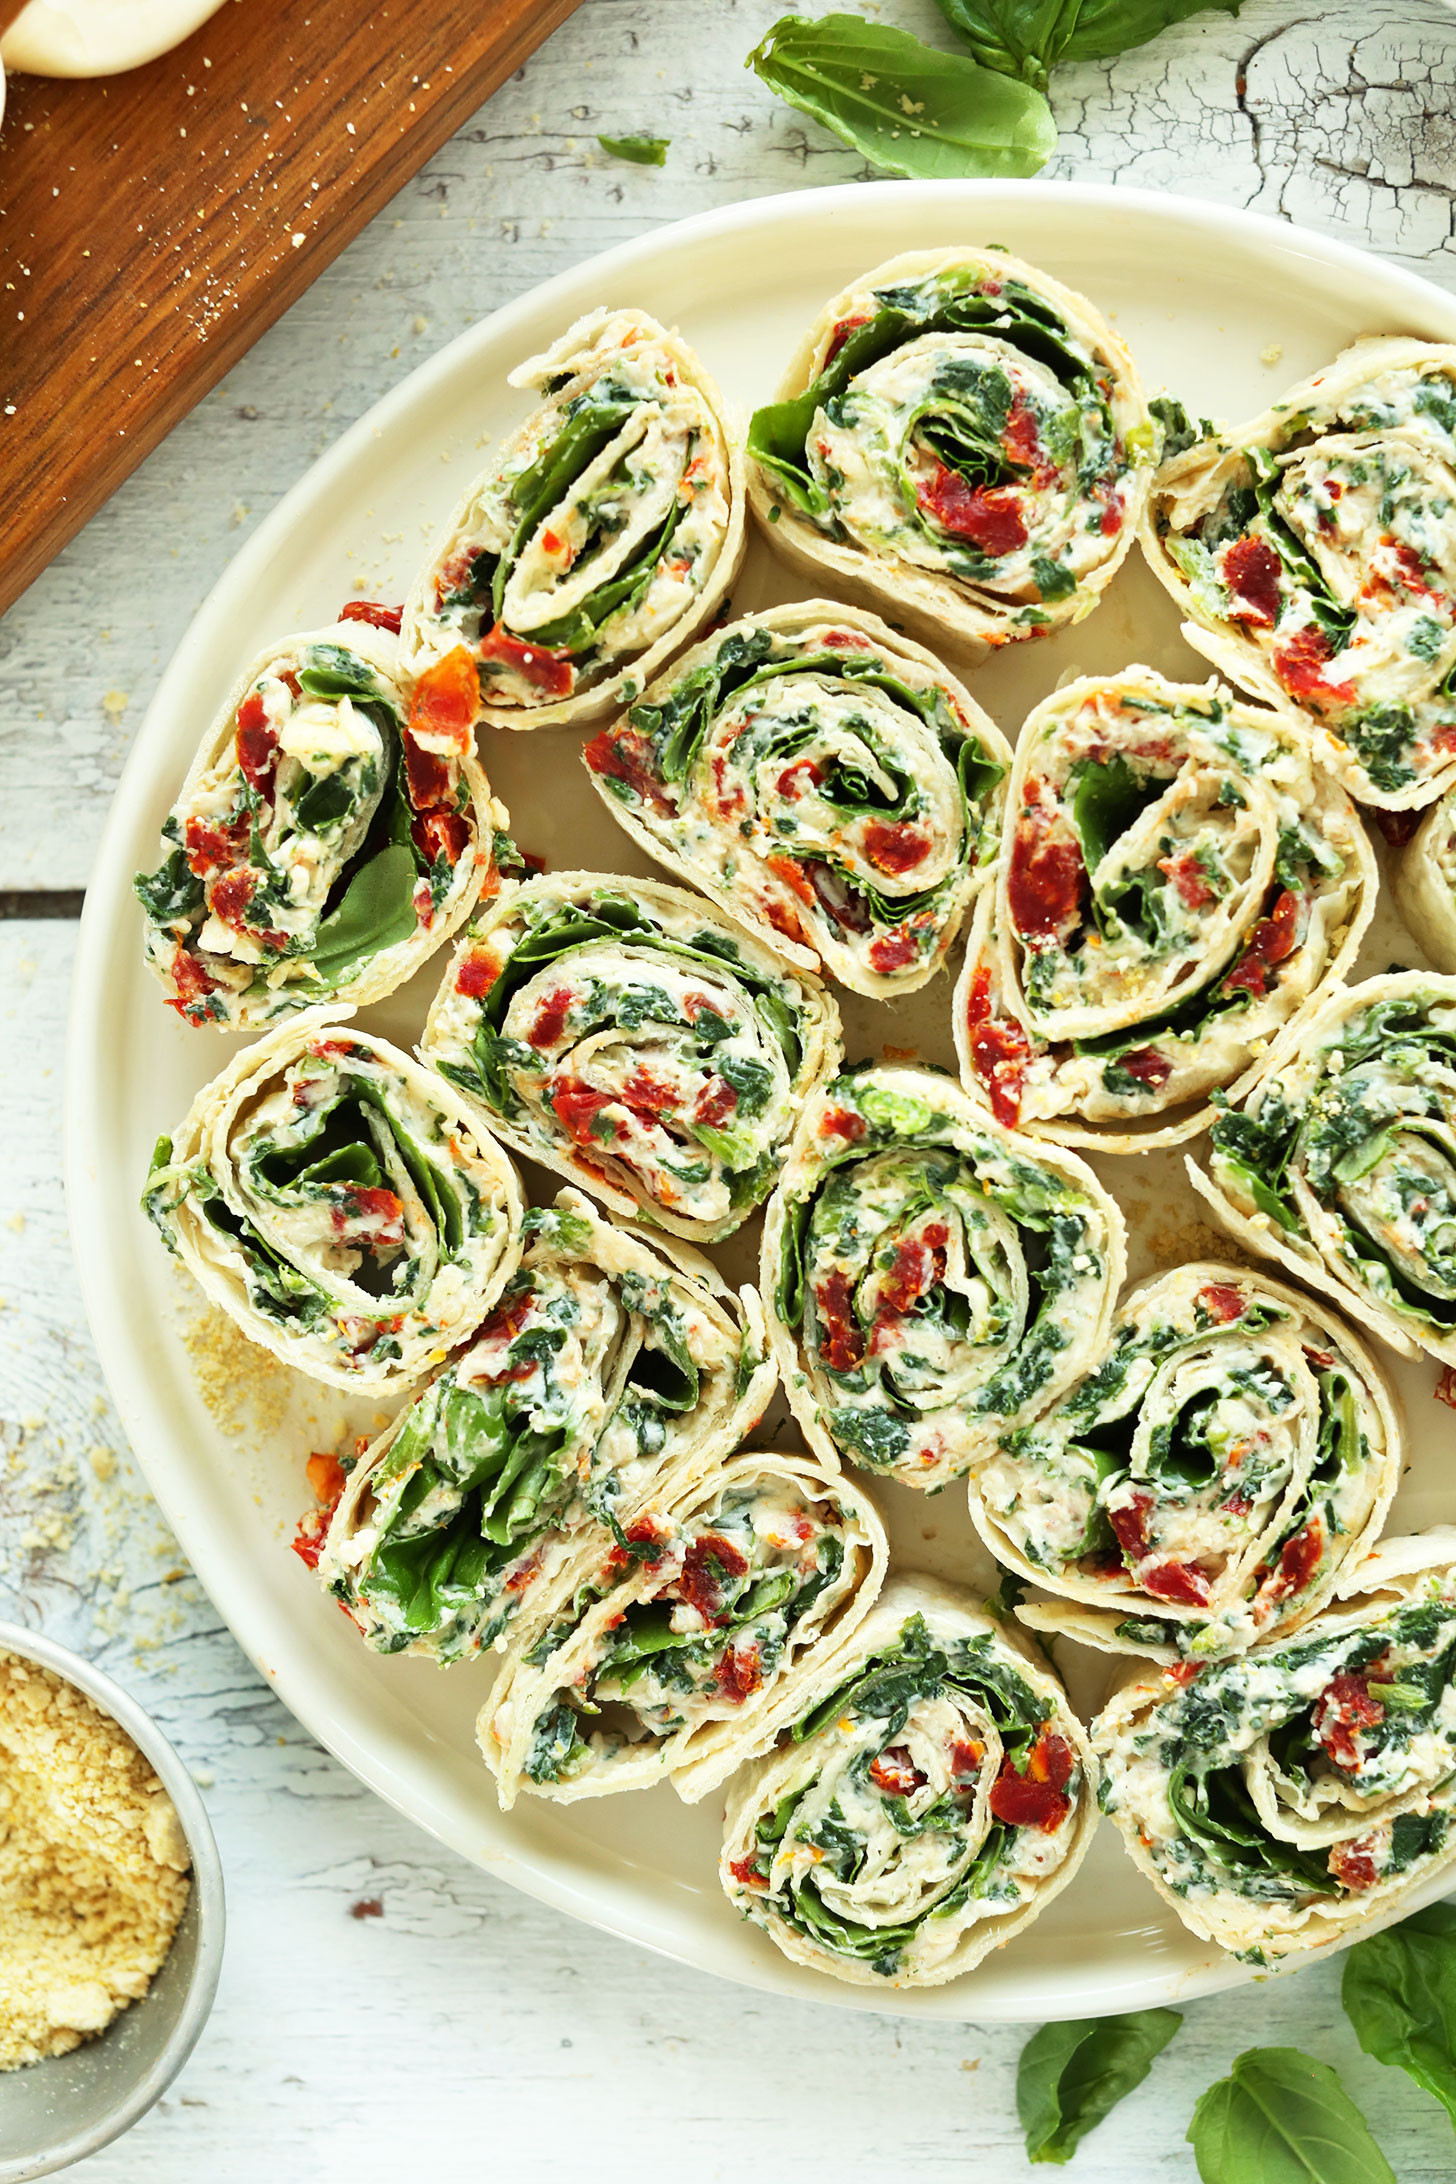 Healthy Appetizers For Potluck
 Healthy Summer Potluck Recipes The District Table